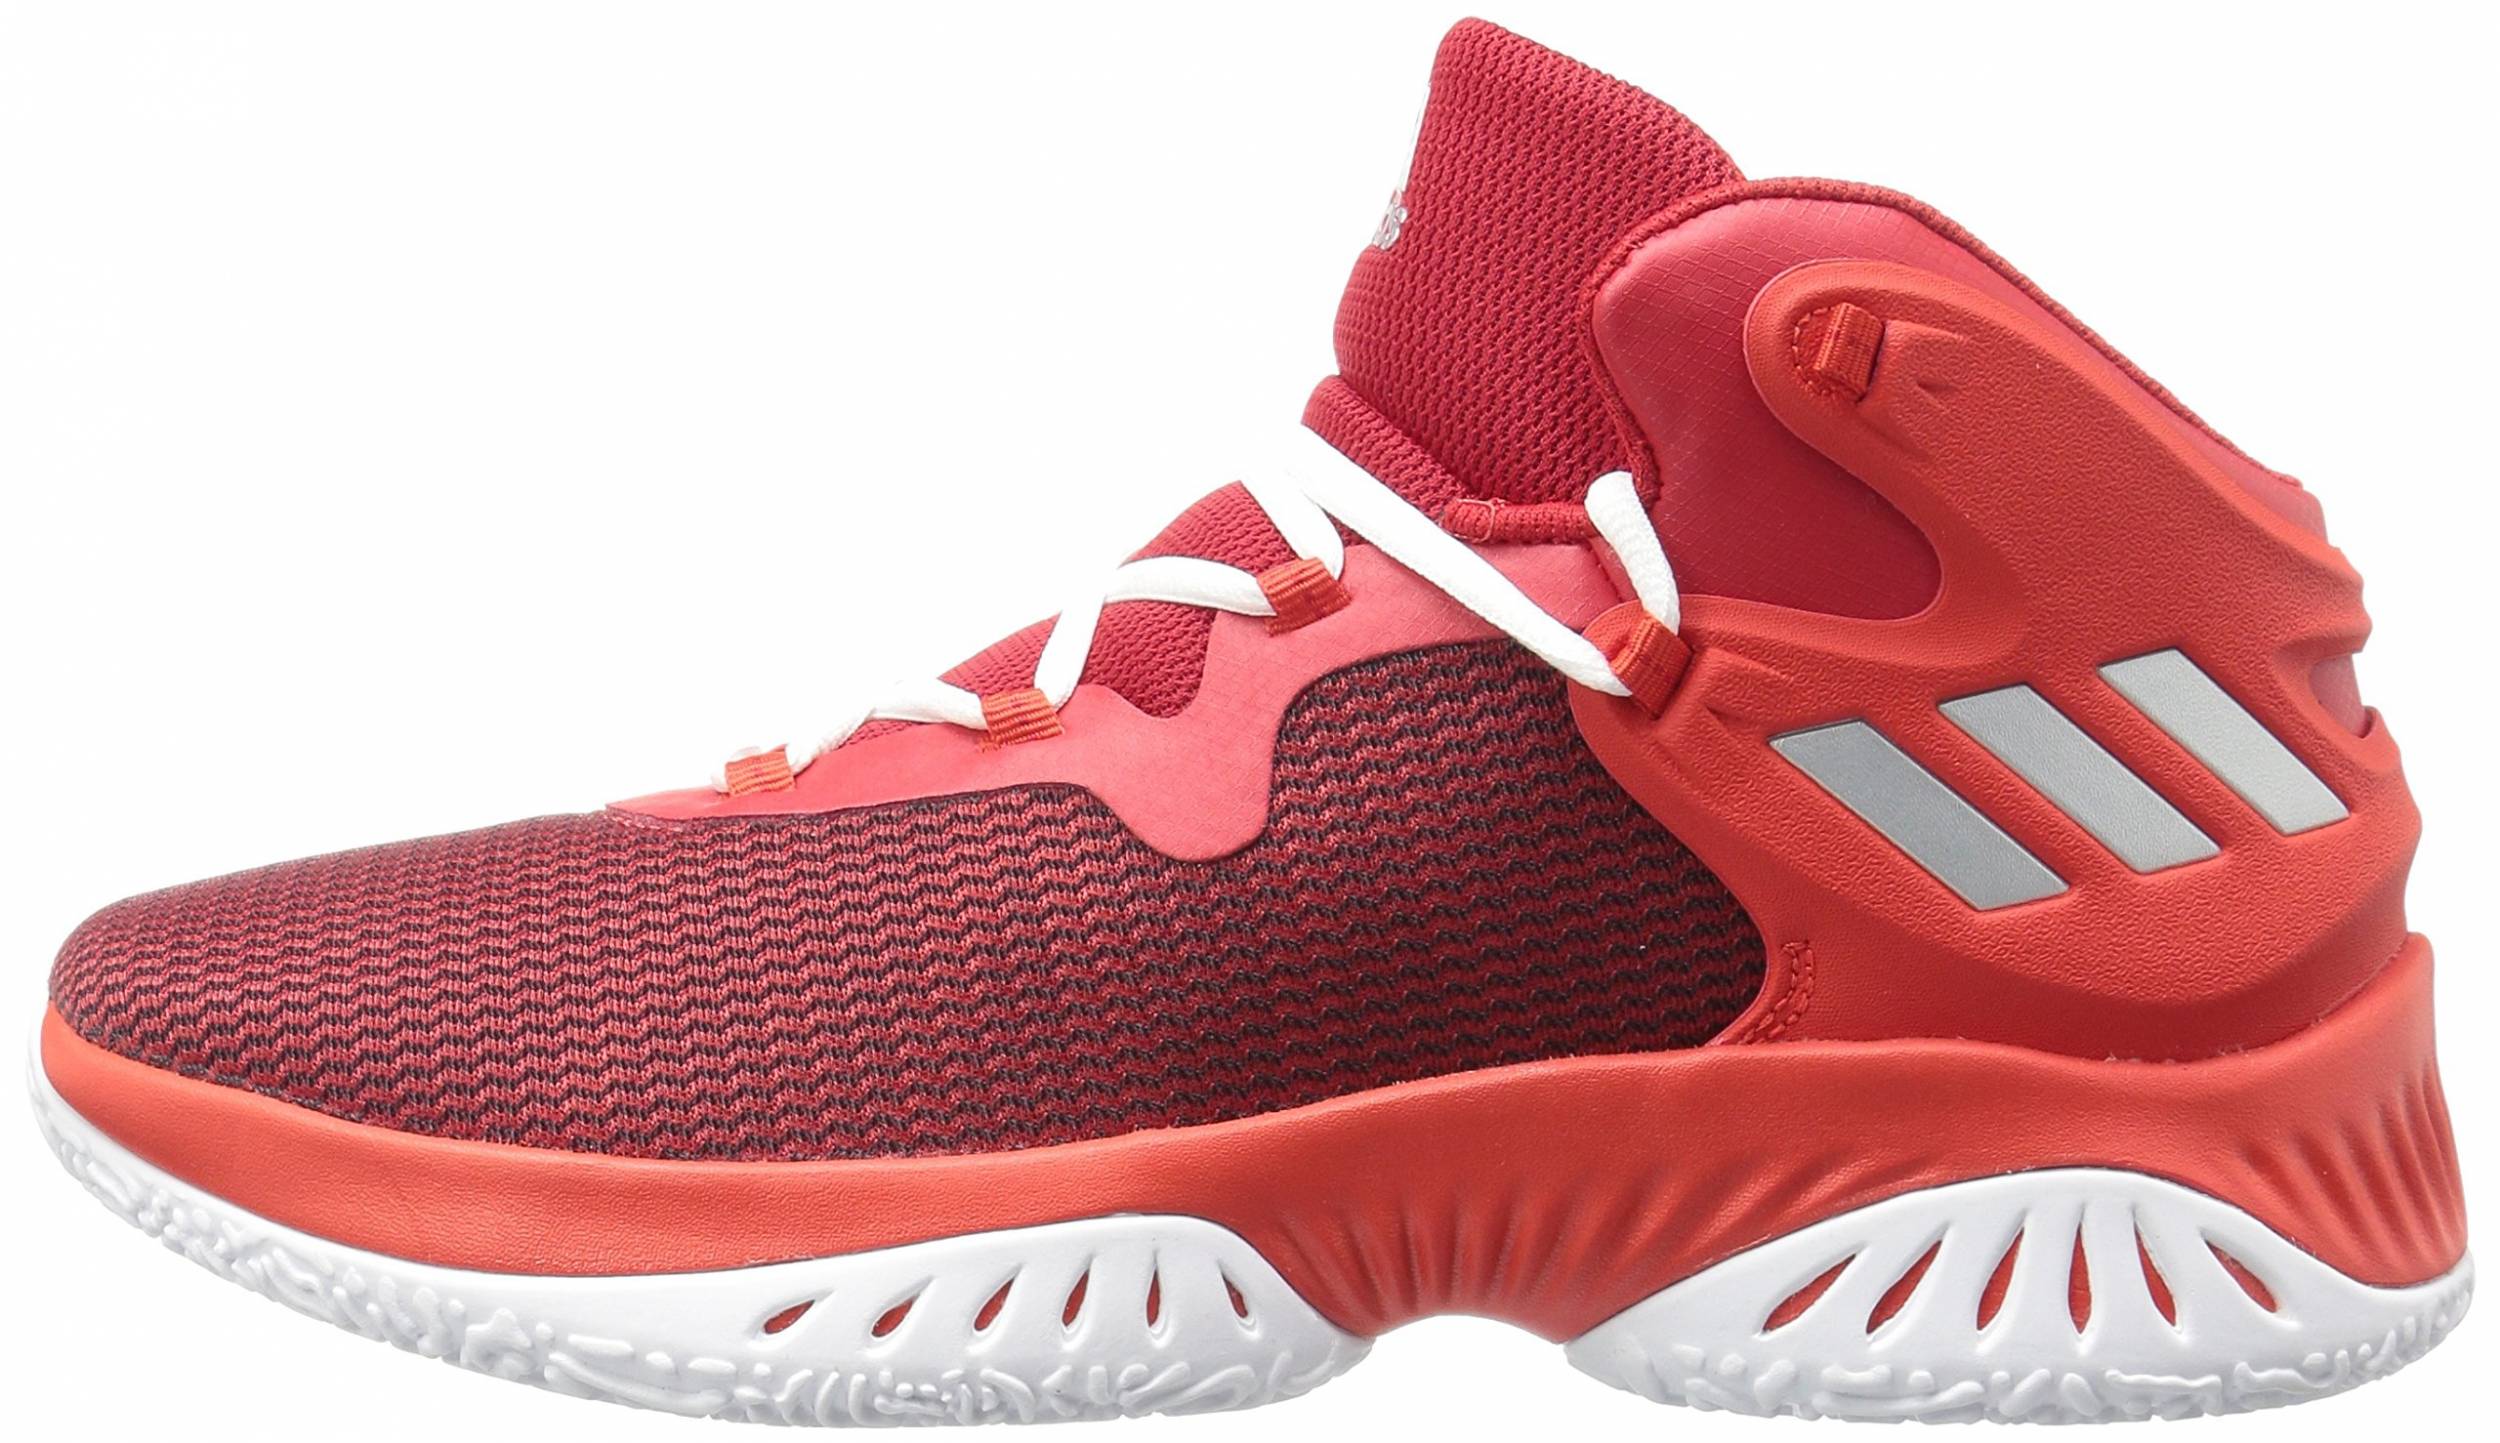 adidas basketball shoes red black white